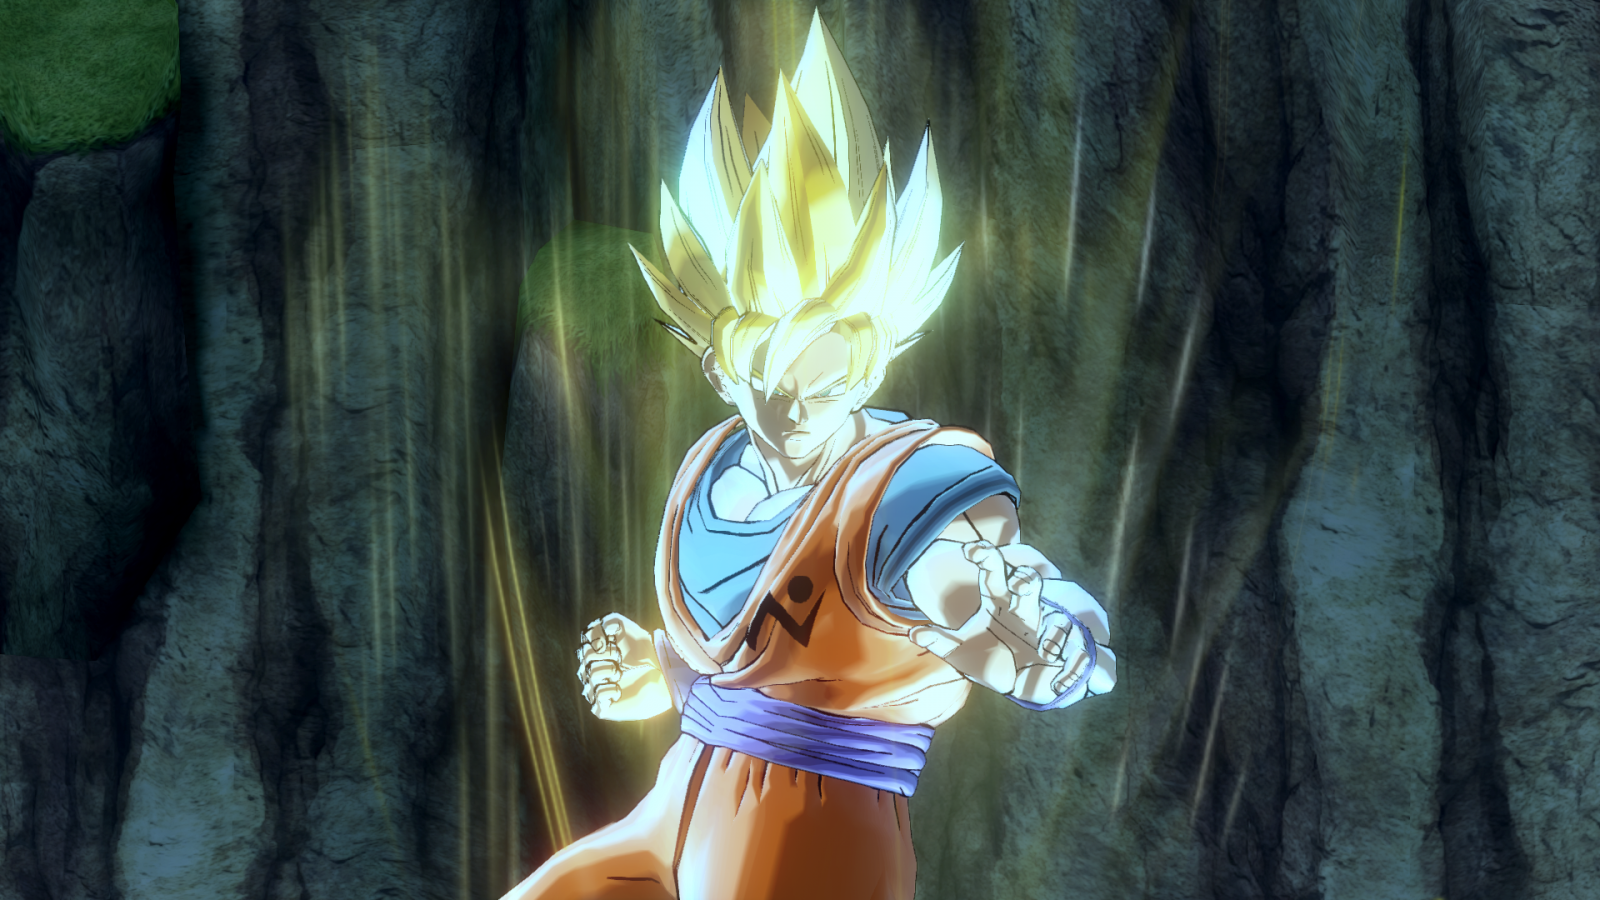 https://videogamemods.com/xenoverse/wp-content/uploads/sites/3/cmdm/354249/1585263034_DRAGON-BALL-XENOVERSE-2-26_03_2020-23_33_15.png